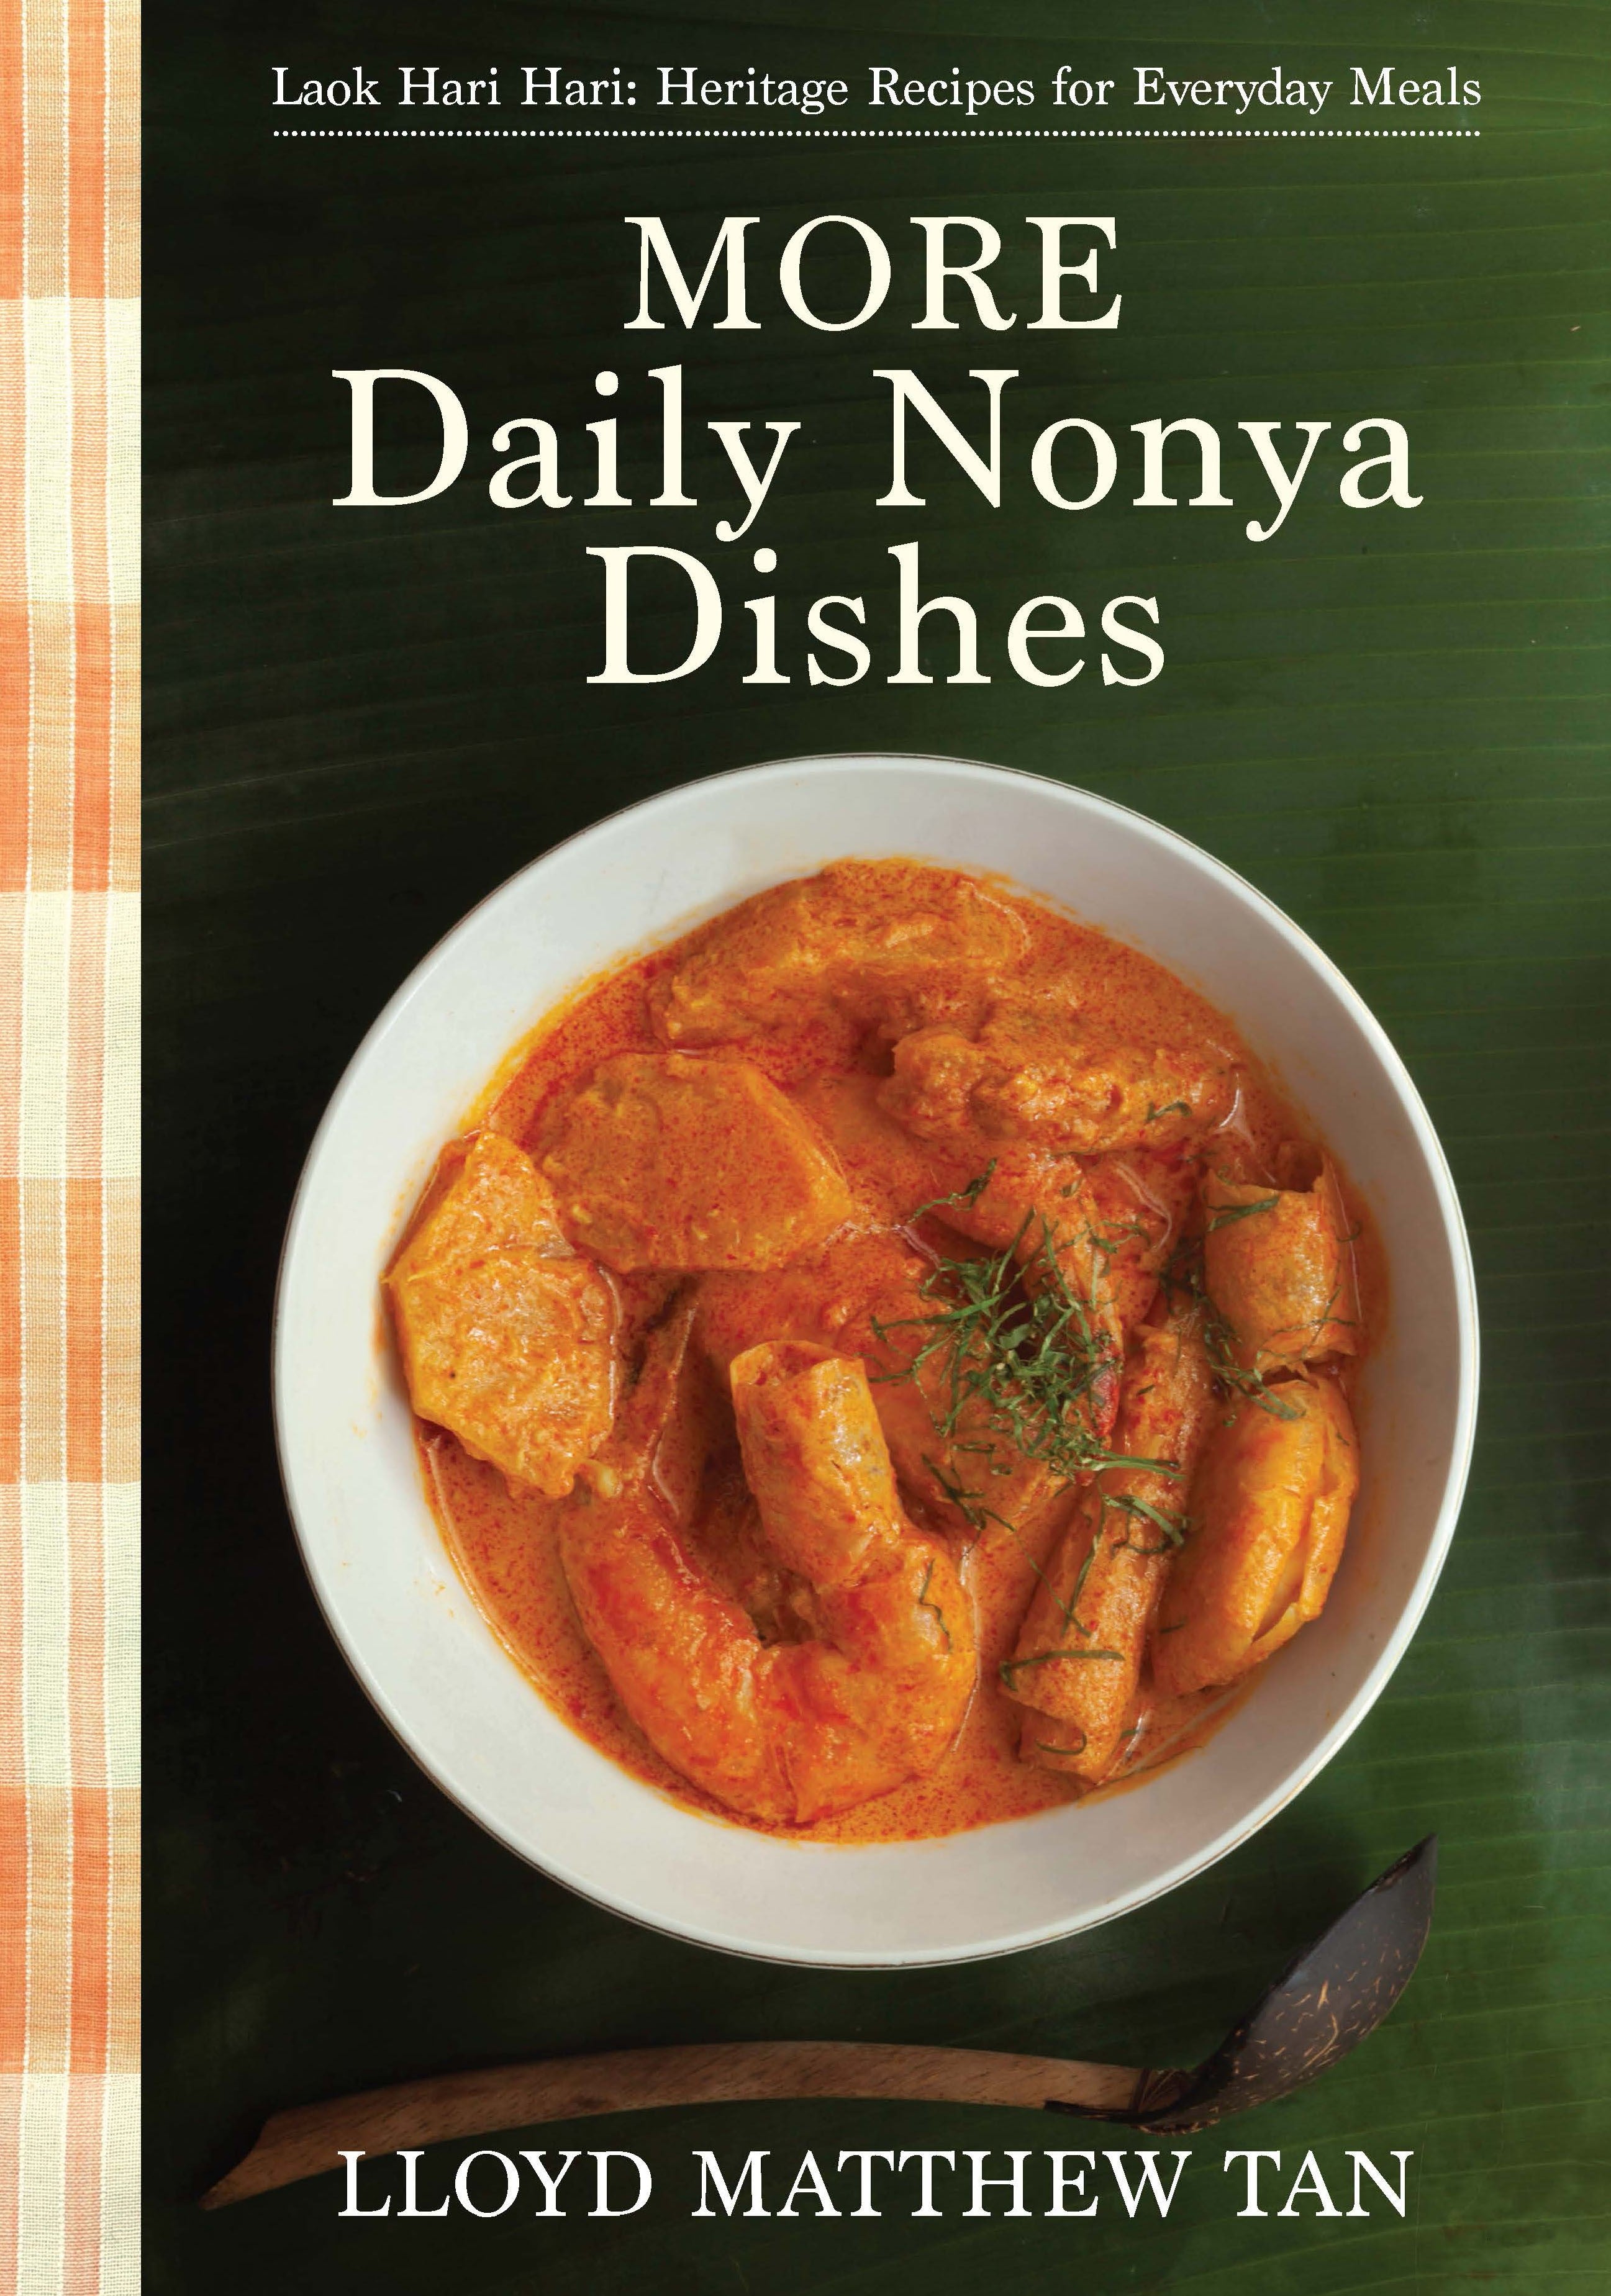 More Daily Nonya Dishes: Heritage Recipes for Everyday Meals